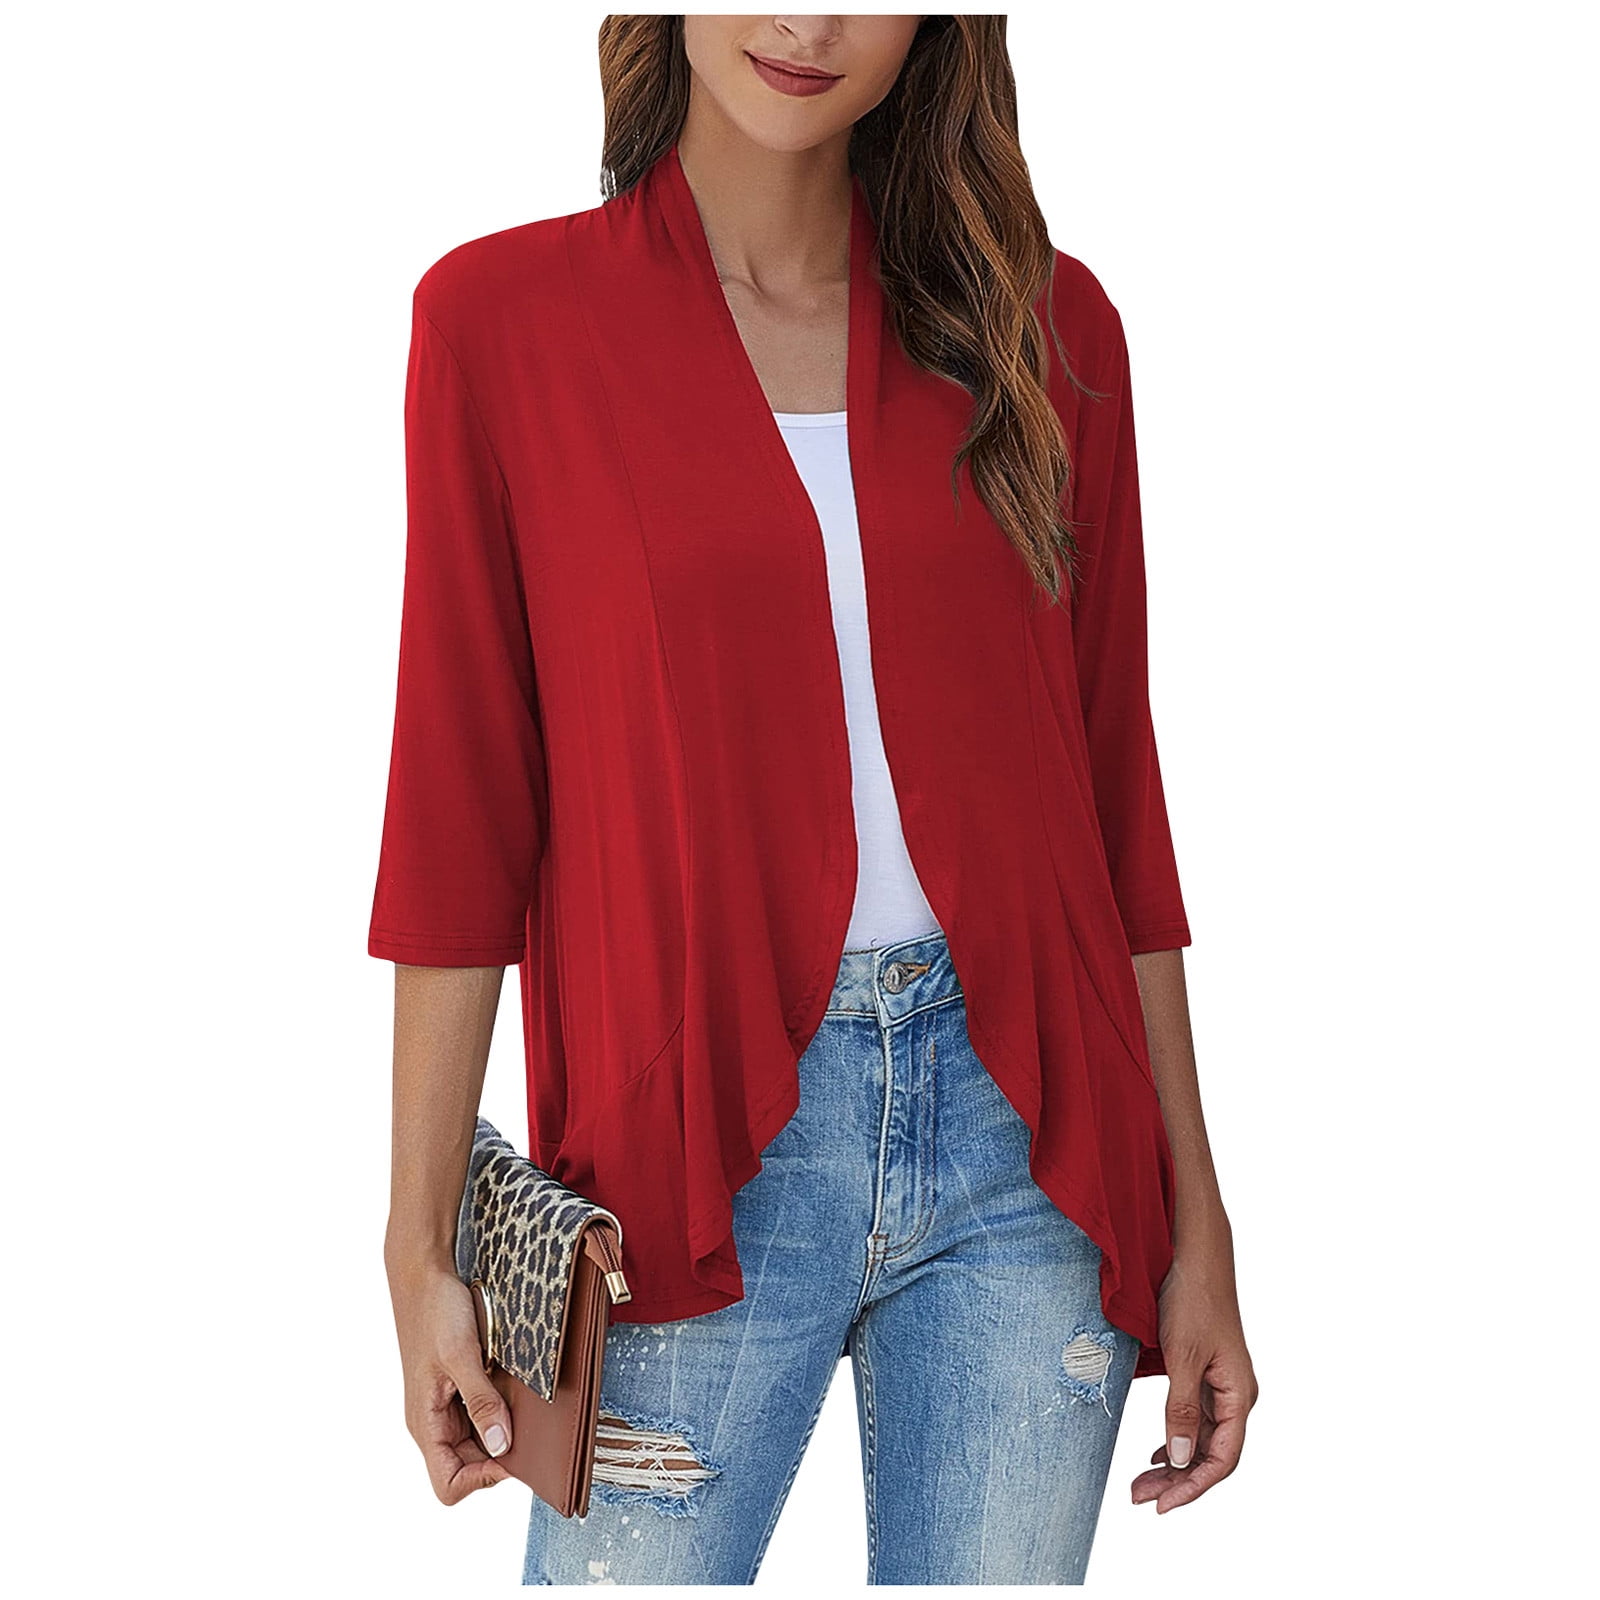 Wenini Clearance Light Cardigans for Women's Casual Lightweight Open Front  Cardigans Soft Draped Ruffles 3/4 Sleeve Cardigan # Flash Sales Today Deals  Prime Clearance Red XL 